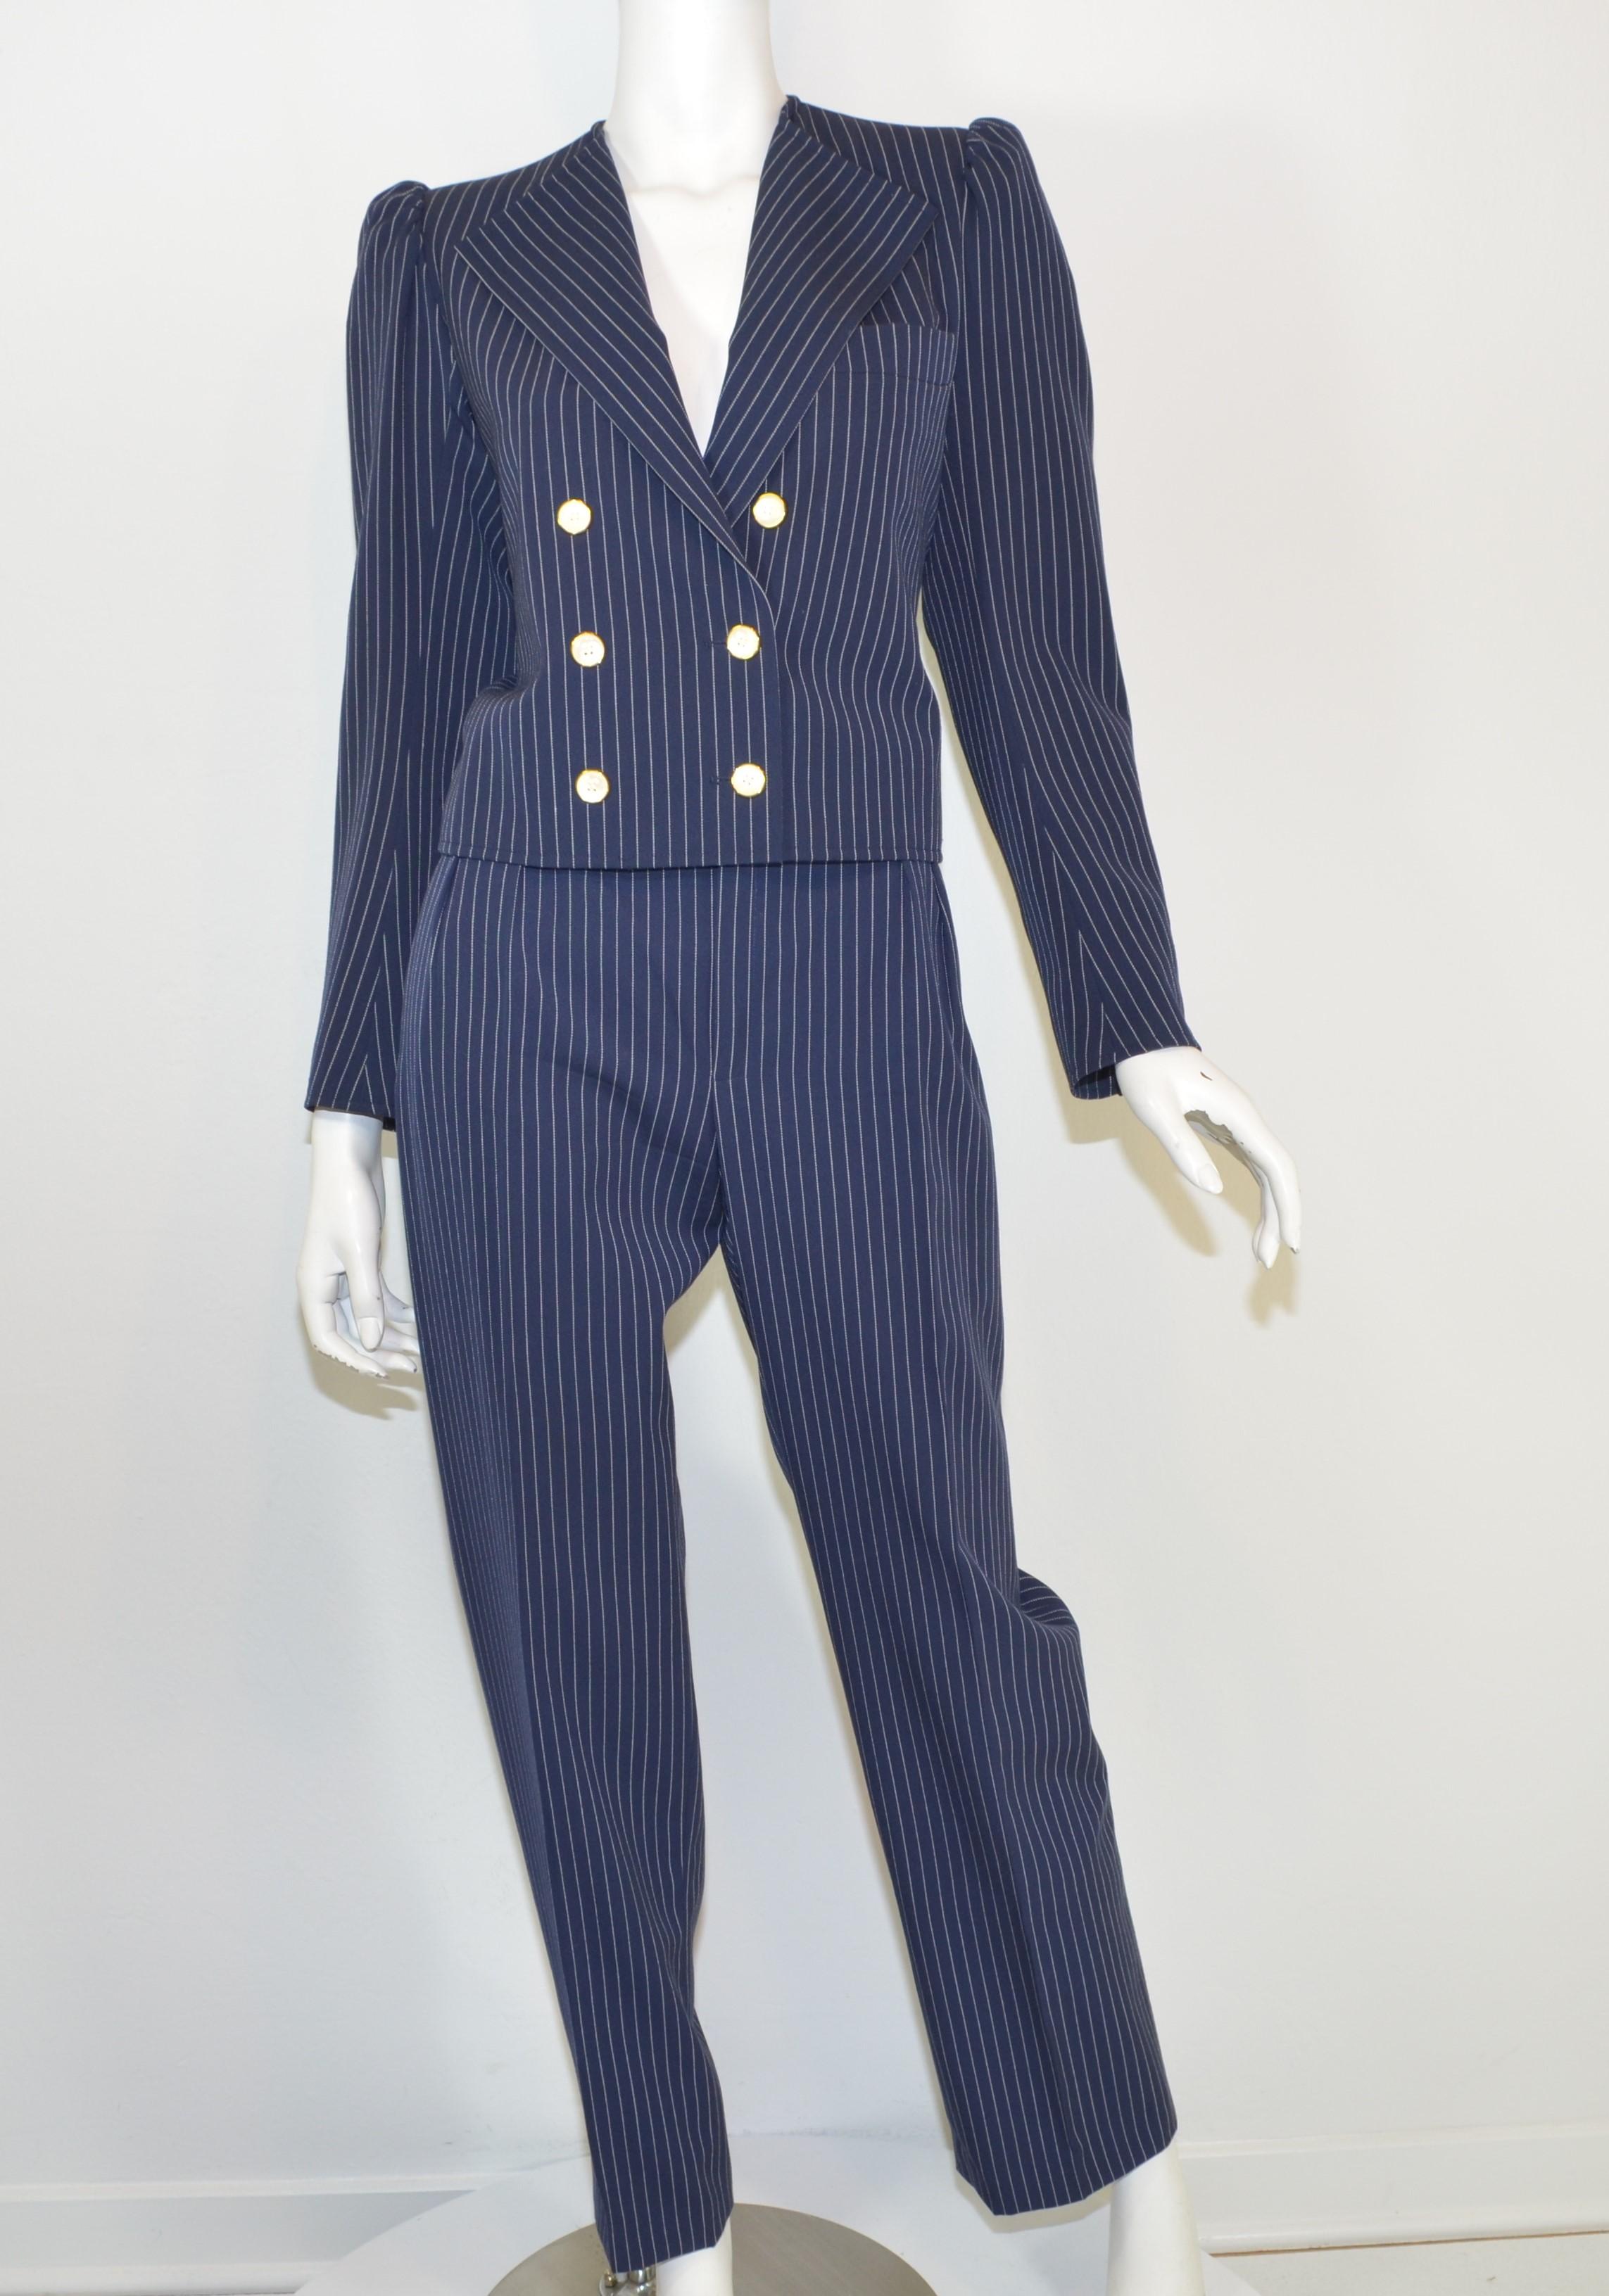 Saint Laurent Vintage Navy Striped Pant + Jacket Suit Set -- Suit is featured in navy blue with white pinstripes. Jacket has opalescent button closures along the front and on the cuffs. Pants have a button and zipper fastening. Pants and jacket are